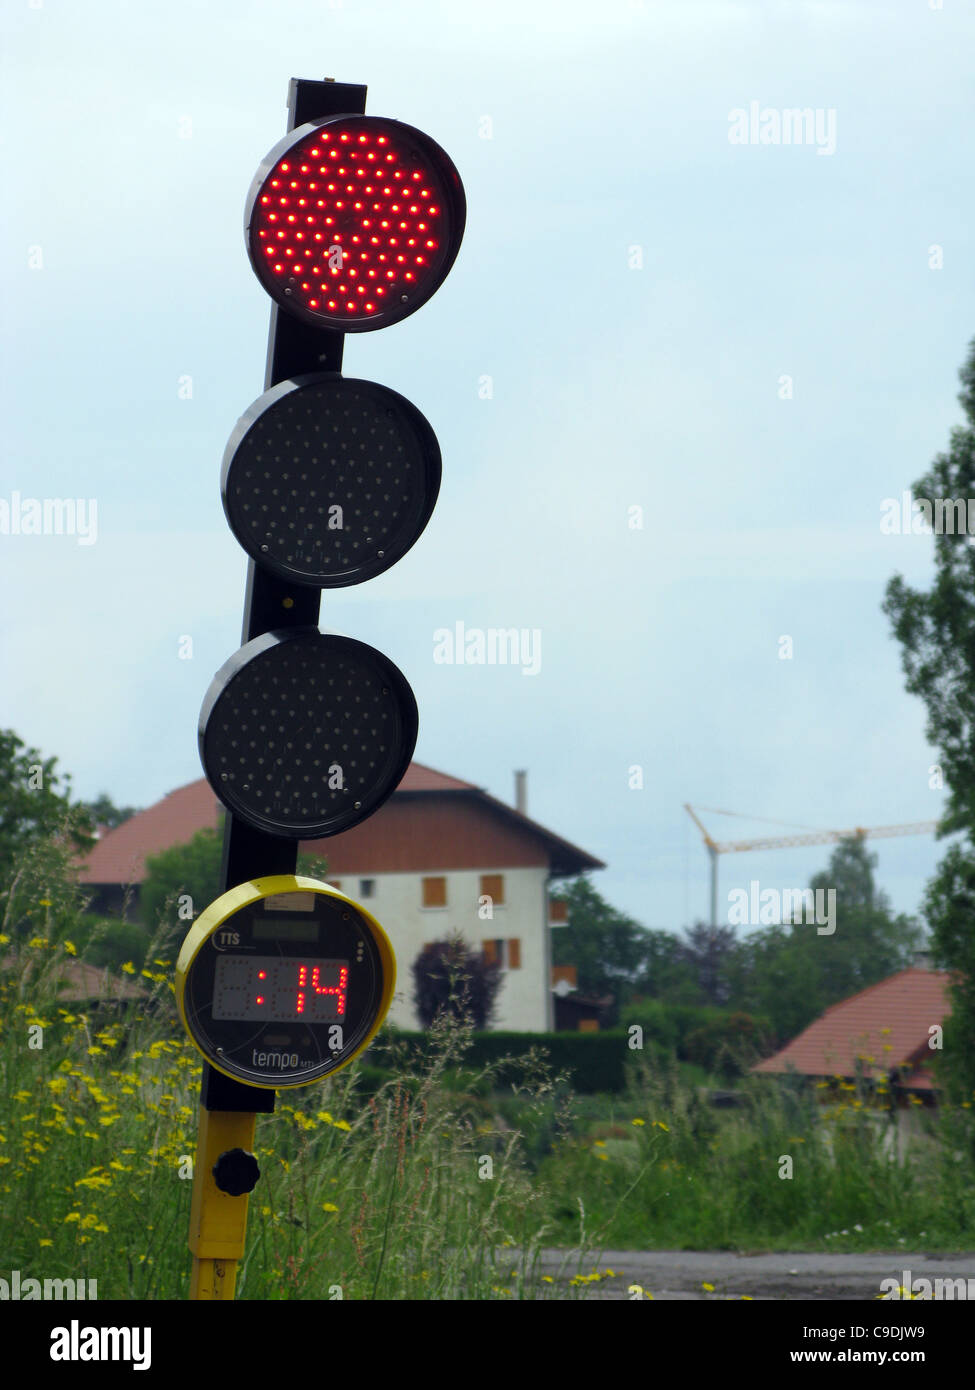 Traffic lights with countdown timer display to show when the light will change. Stock Photo